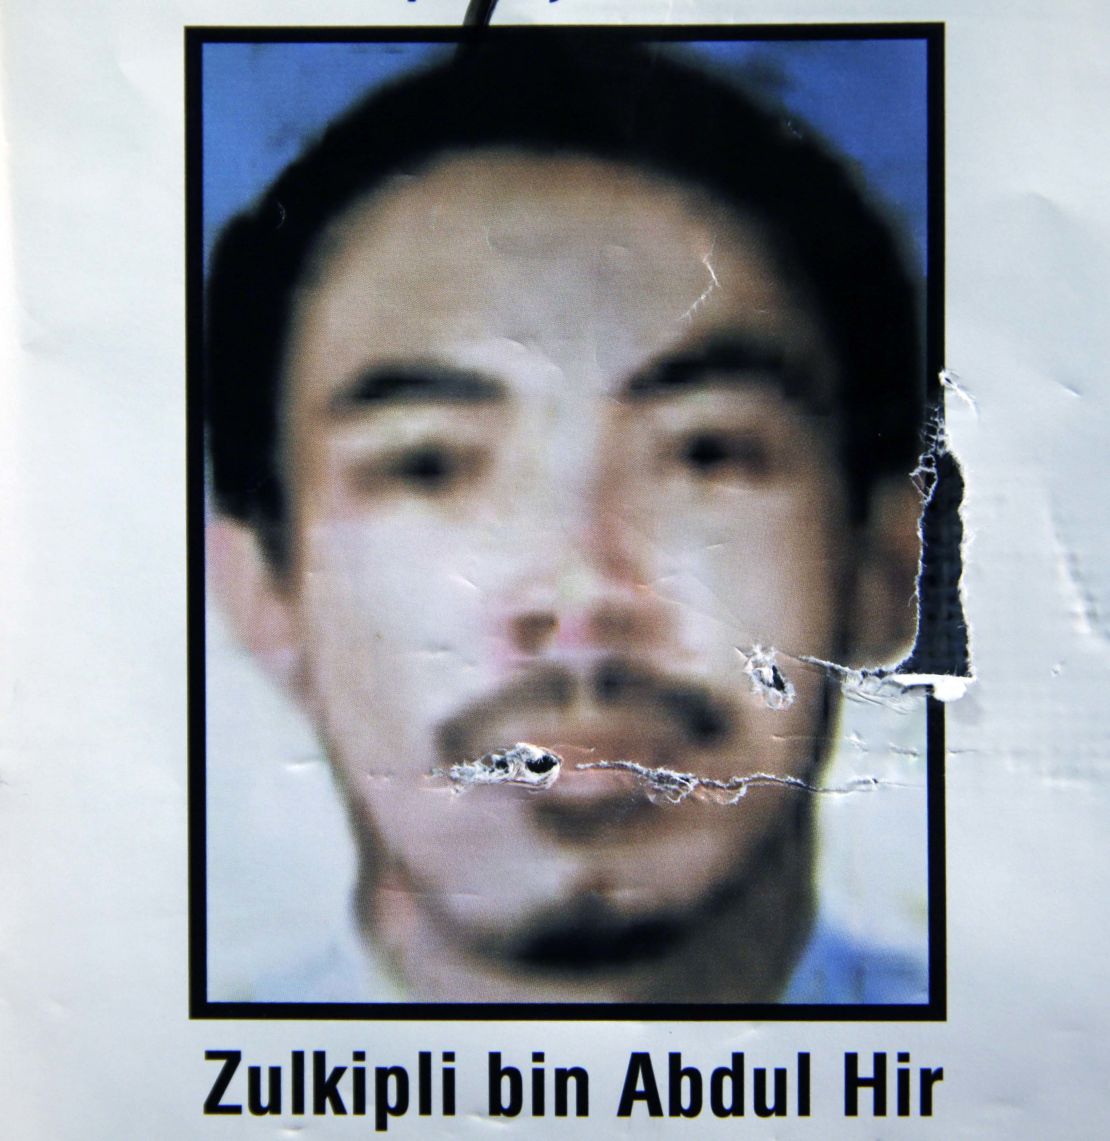 Undated file photo of a Philippine National Police "wanted" poster for Malaysian terrorist Zulkifli bin Hir, known as Marwan.